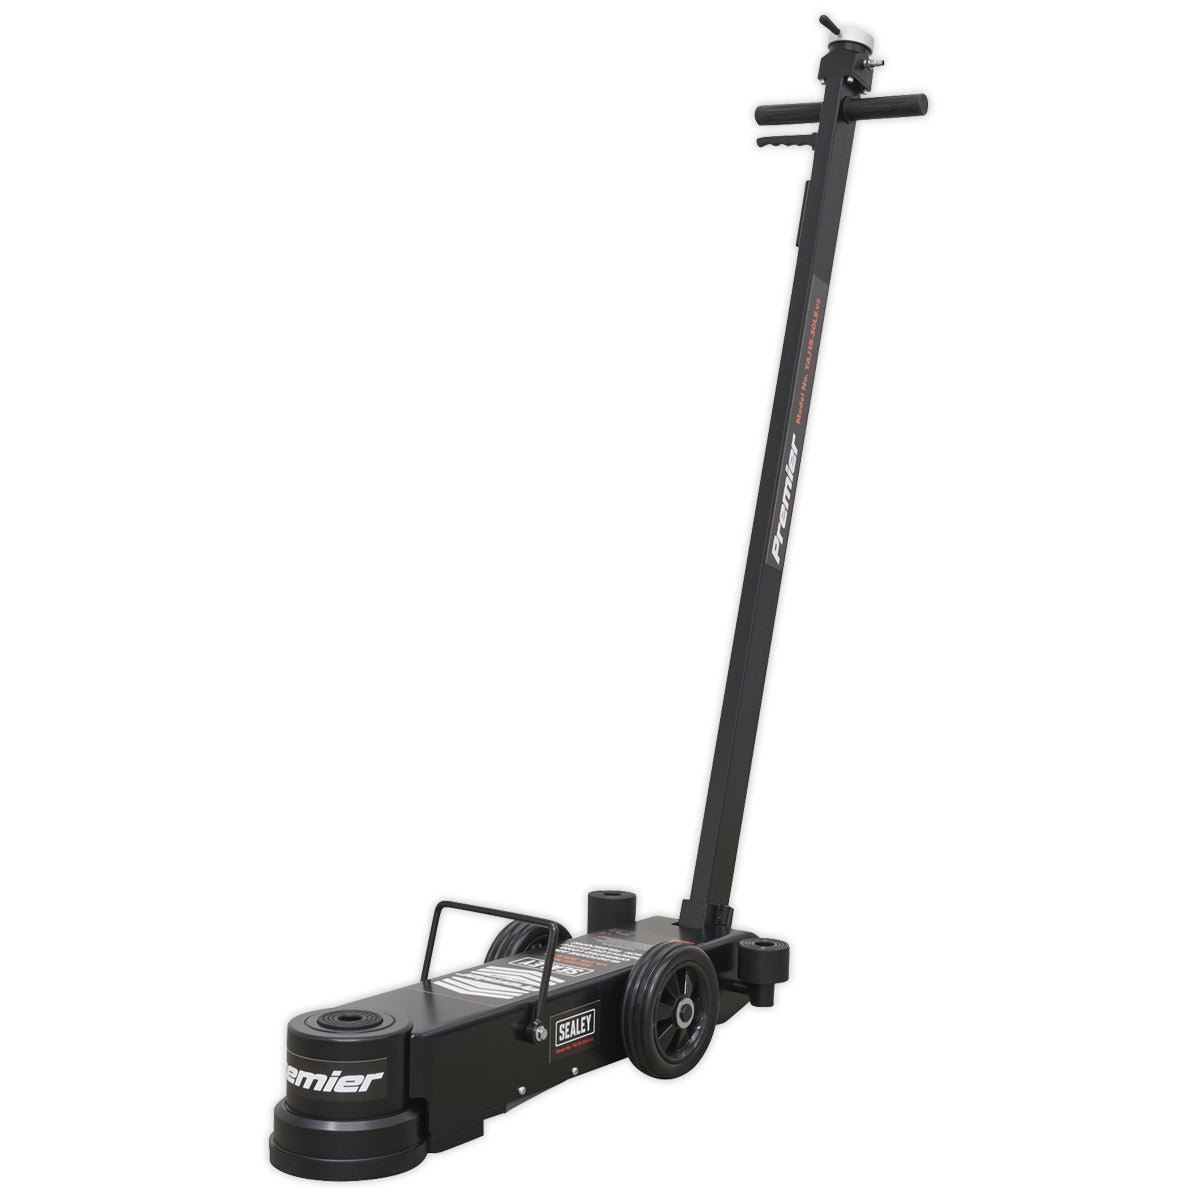 Sealey Air Operated Jack 15-30 Tonne Telescopic - Long Reach/Low Profile